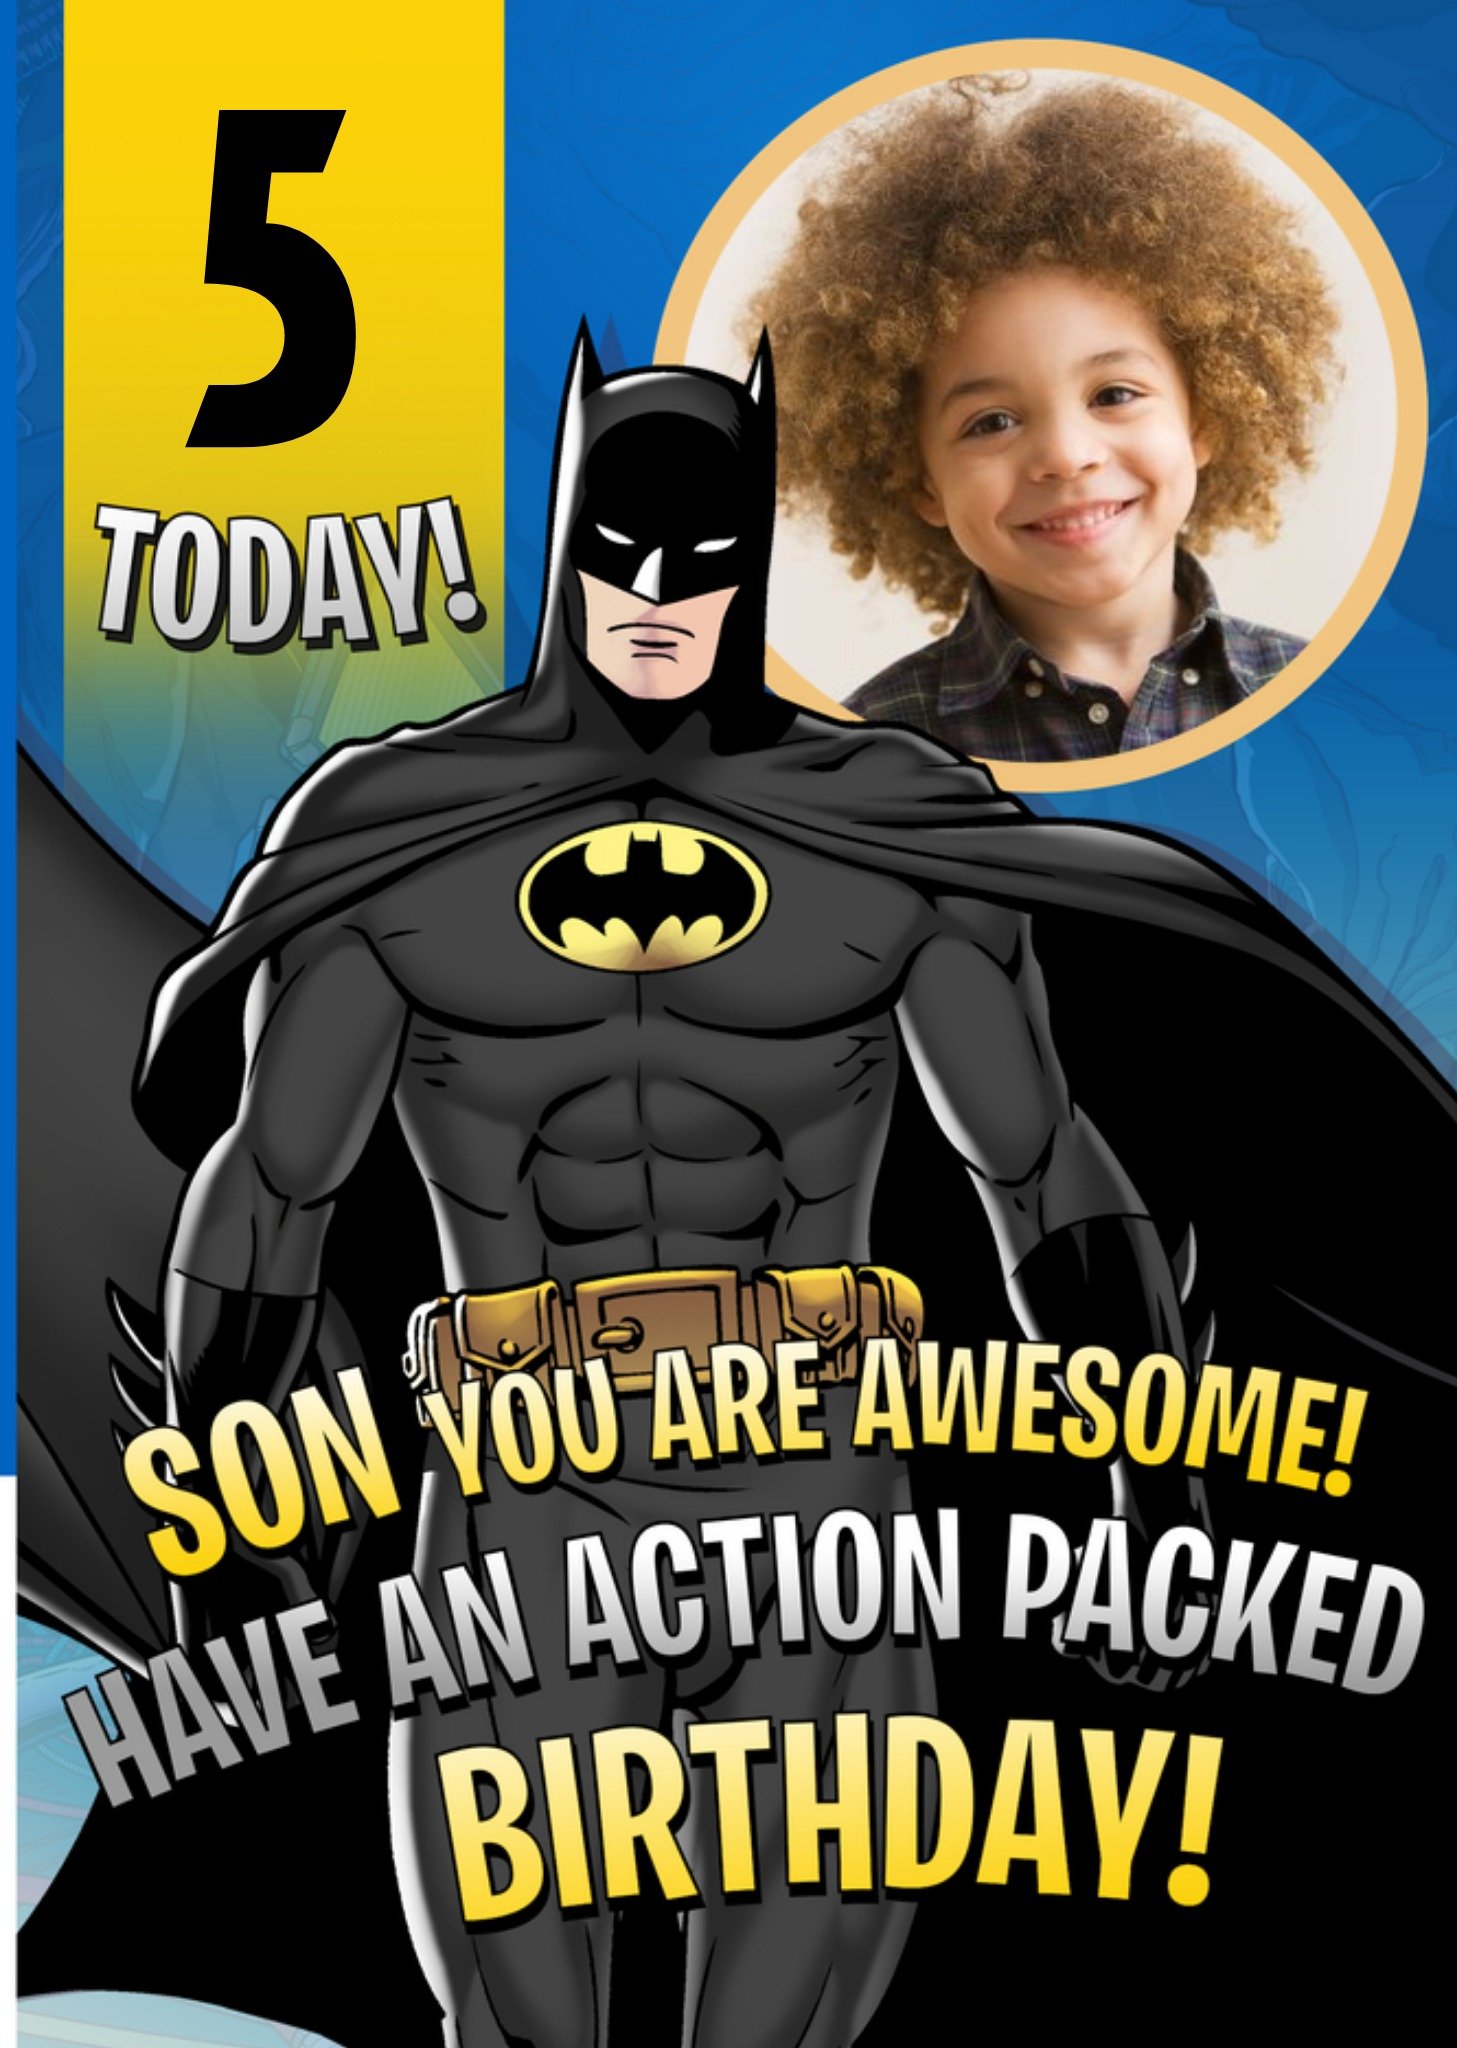 Batman 5 Today Action Packed Birthday Photo Upload Card, Large